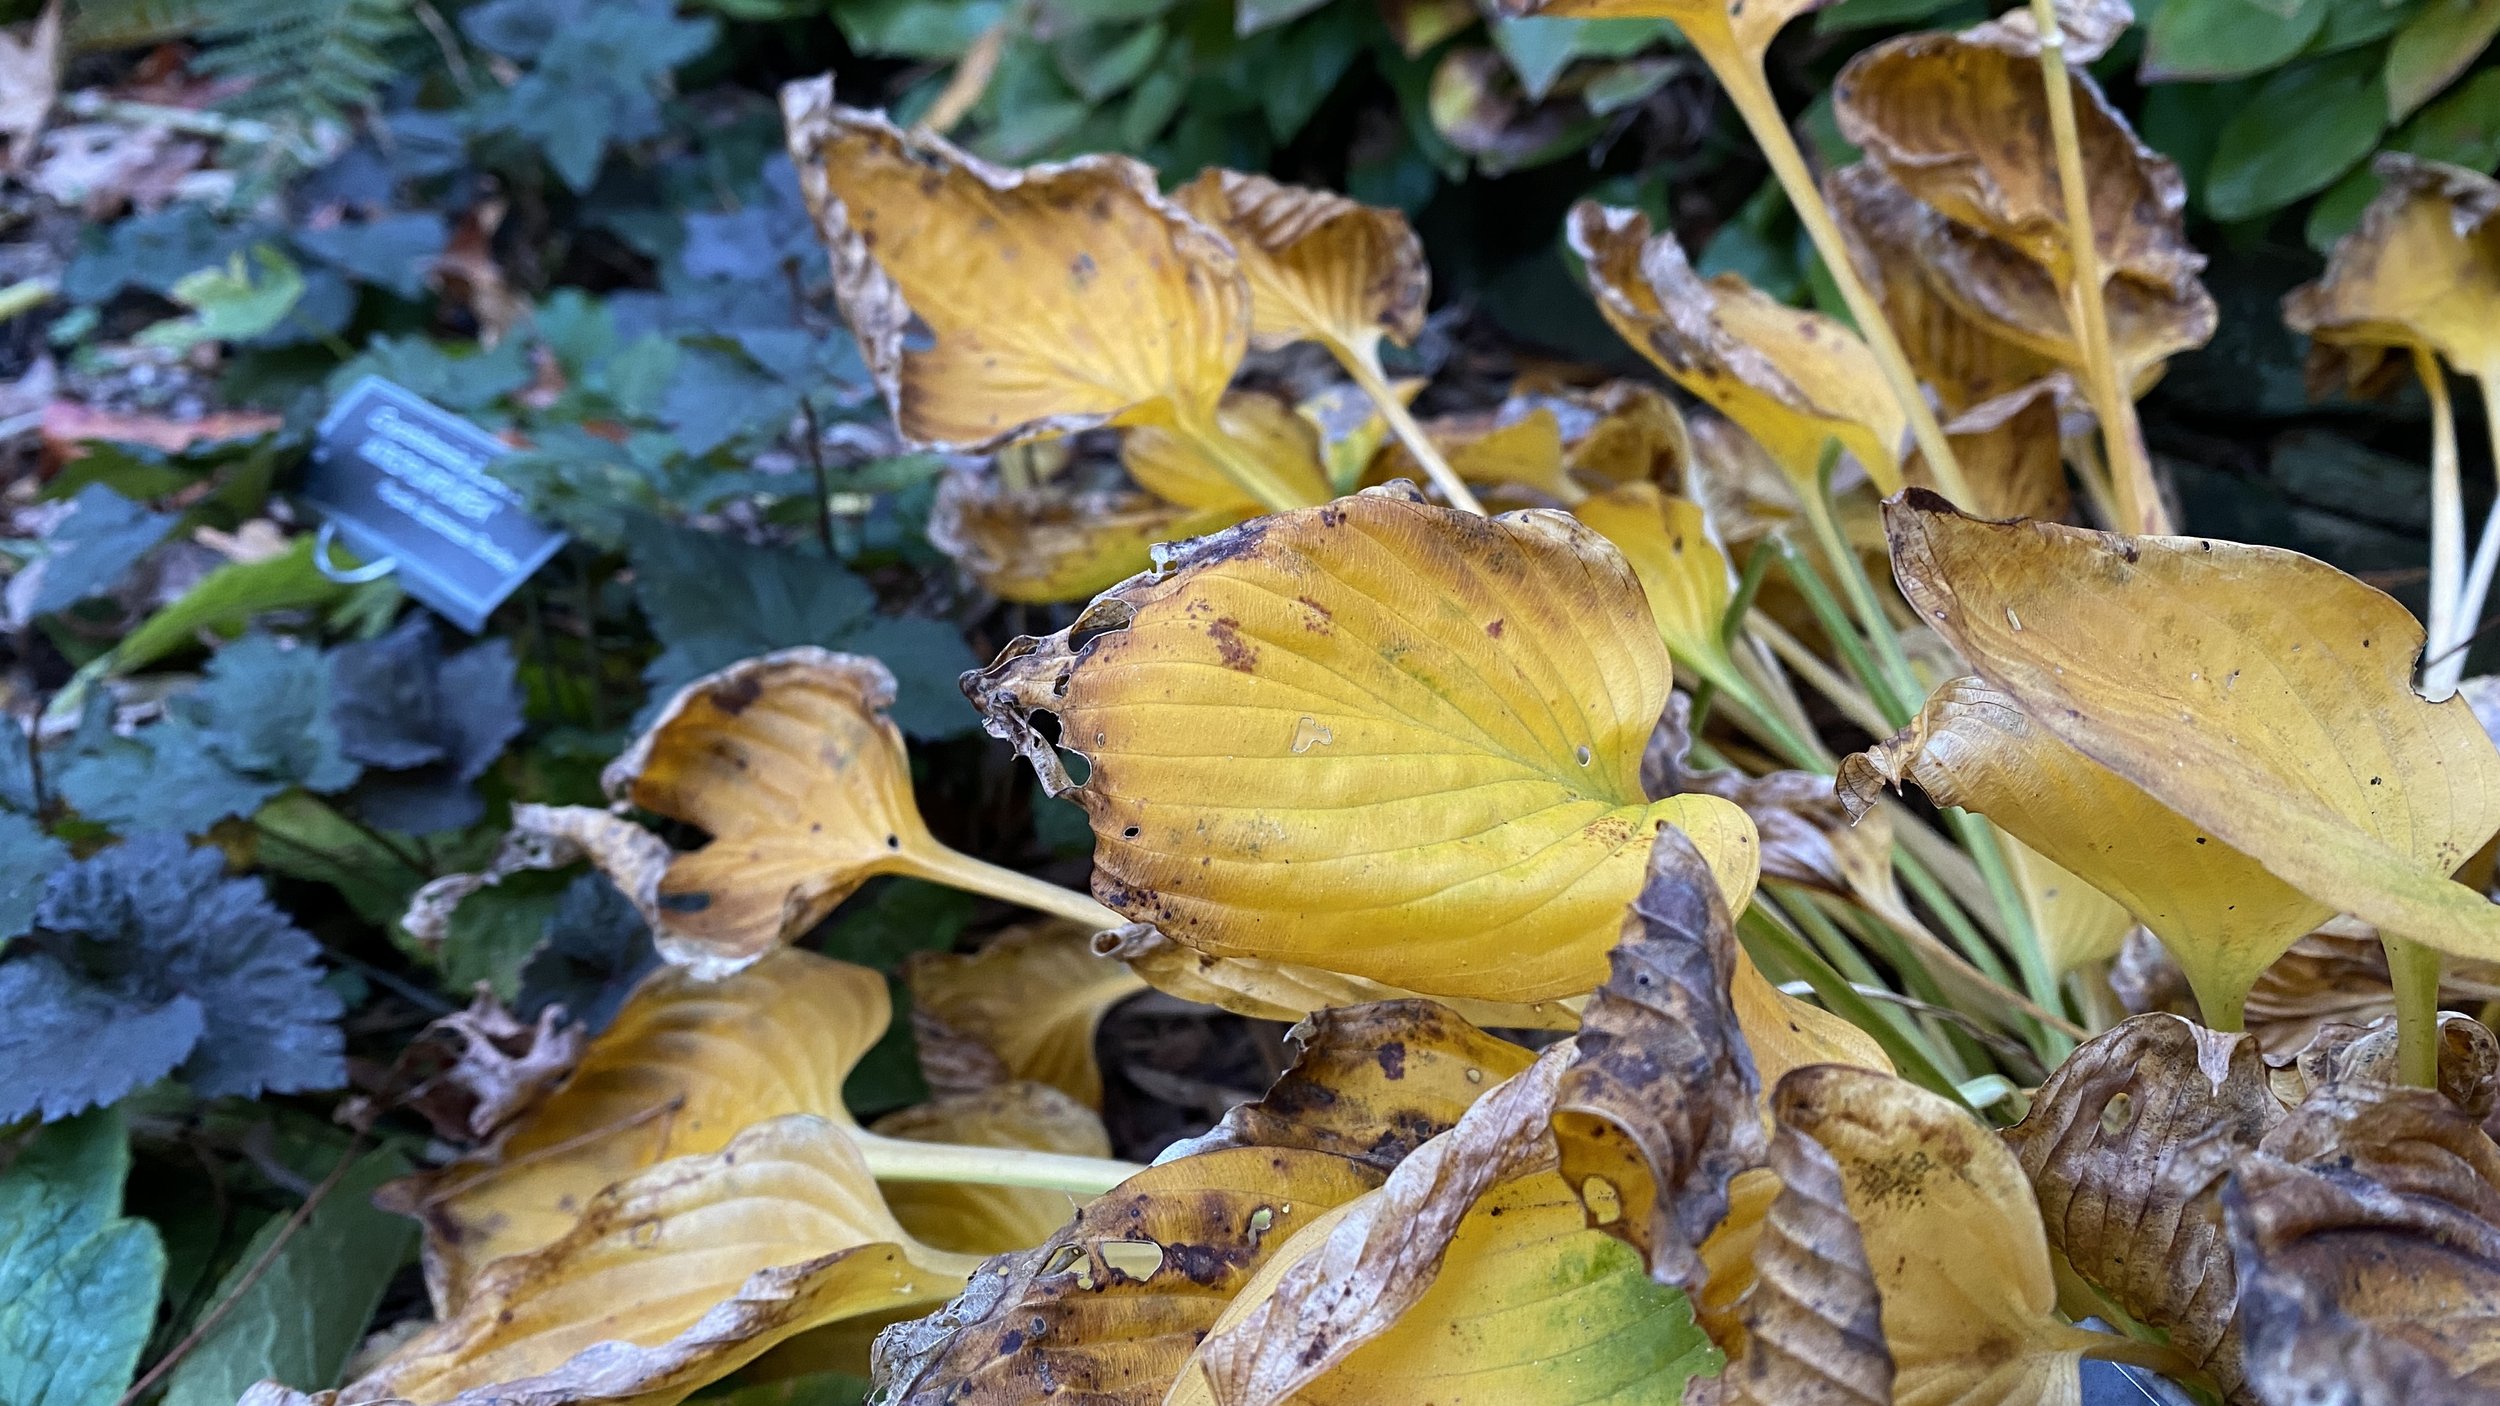  I find beauty in senescence.  The brilliant yellow and warm tan of  Hosta  ‘Hadspen Heron’ leaves contrasts nicely with fresh dark purple foliage of  Cryptotaenia japonica  f.  atropurpurea  (Japanese cow parsley) in the bed just behind the house. 